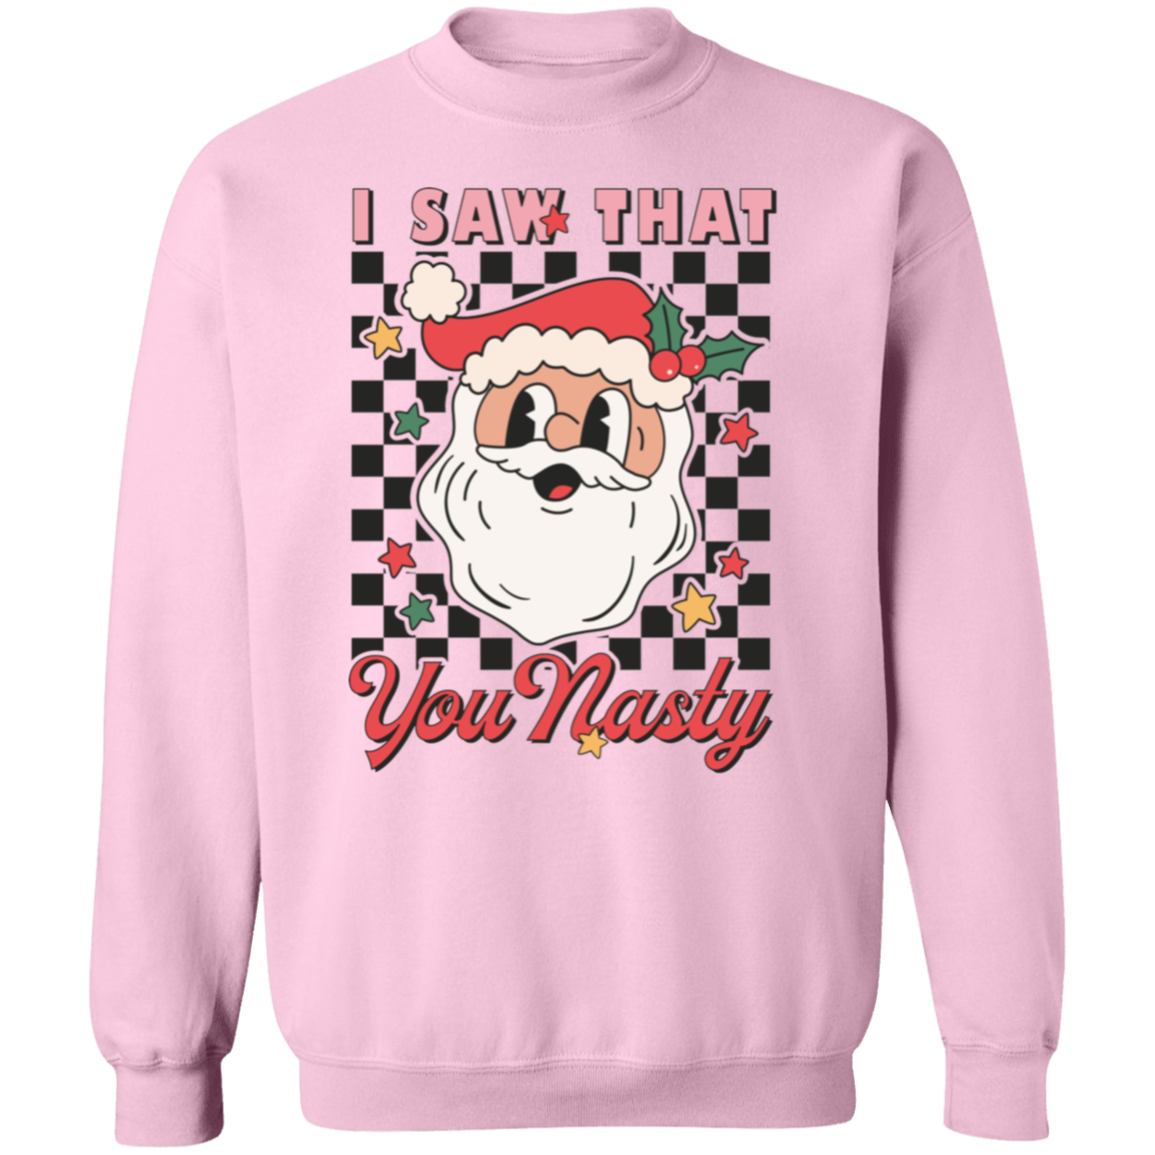 I Saw That You Nasty - Unisex Ugly Sweater, Christmas, Winter, Fall